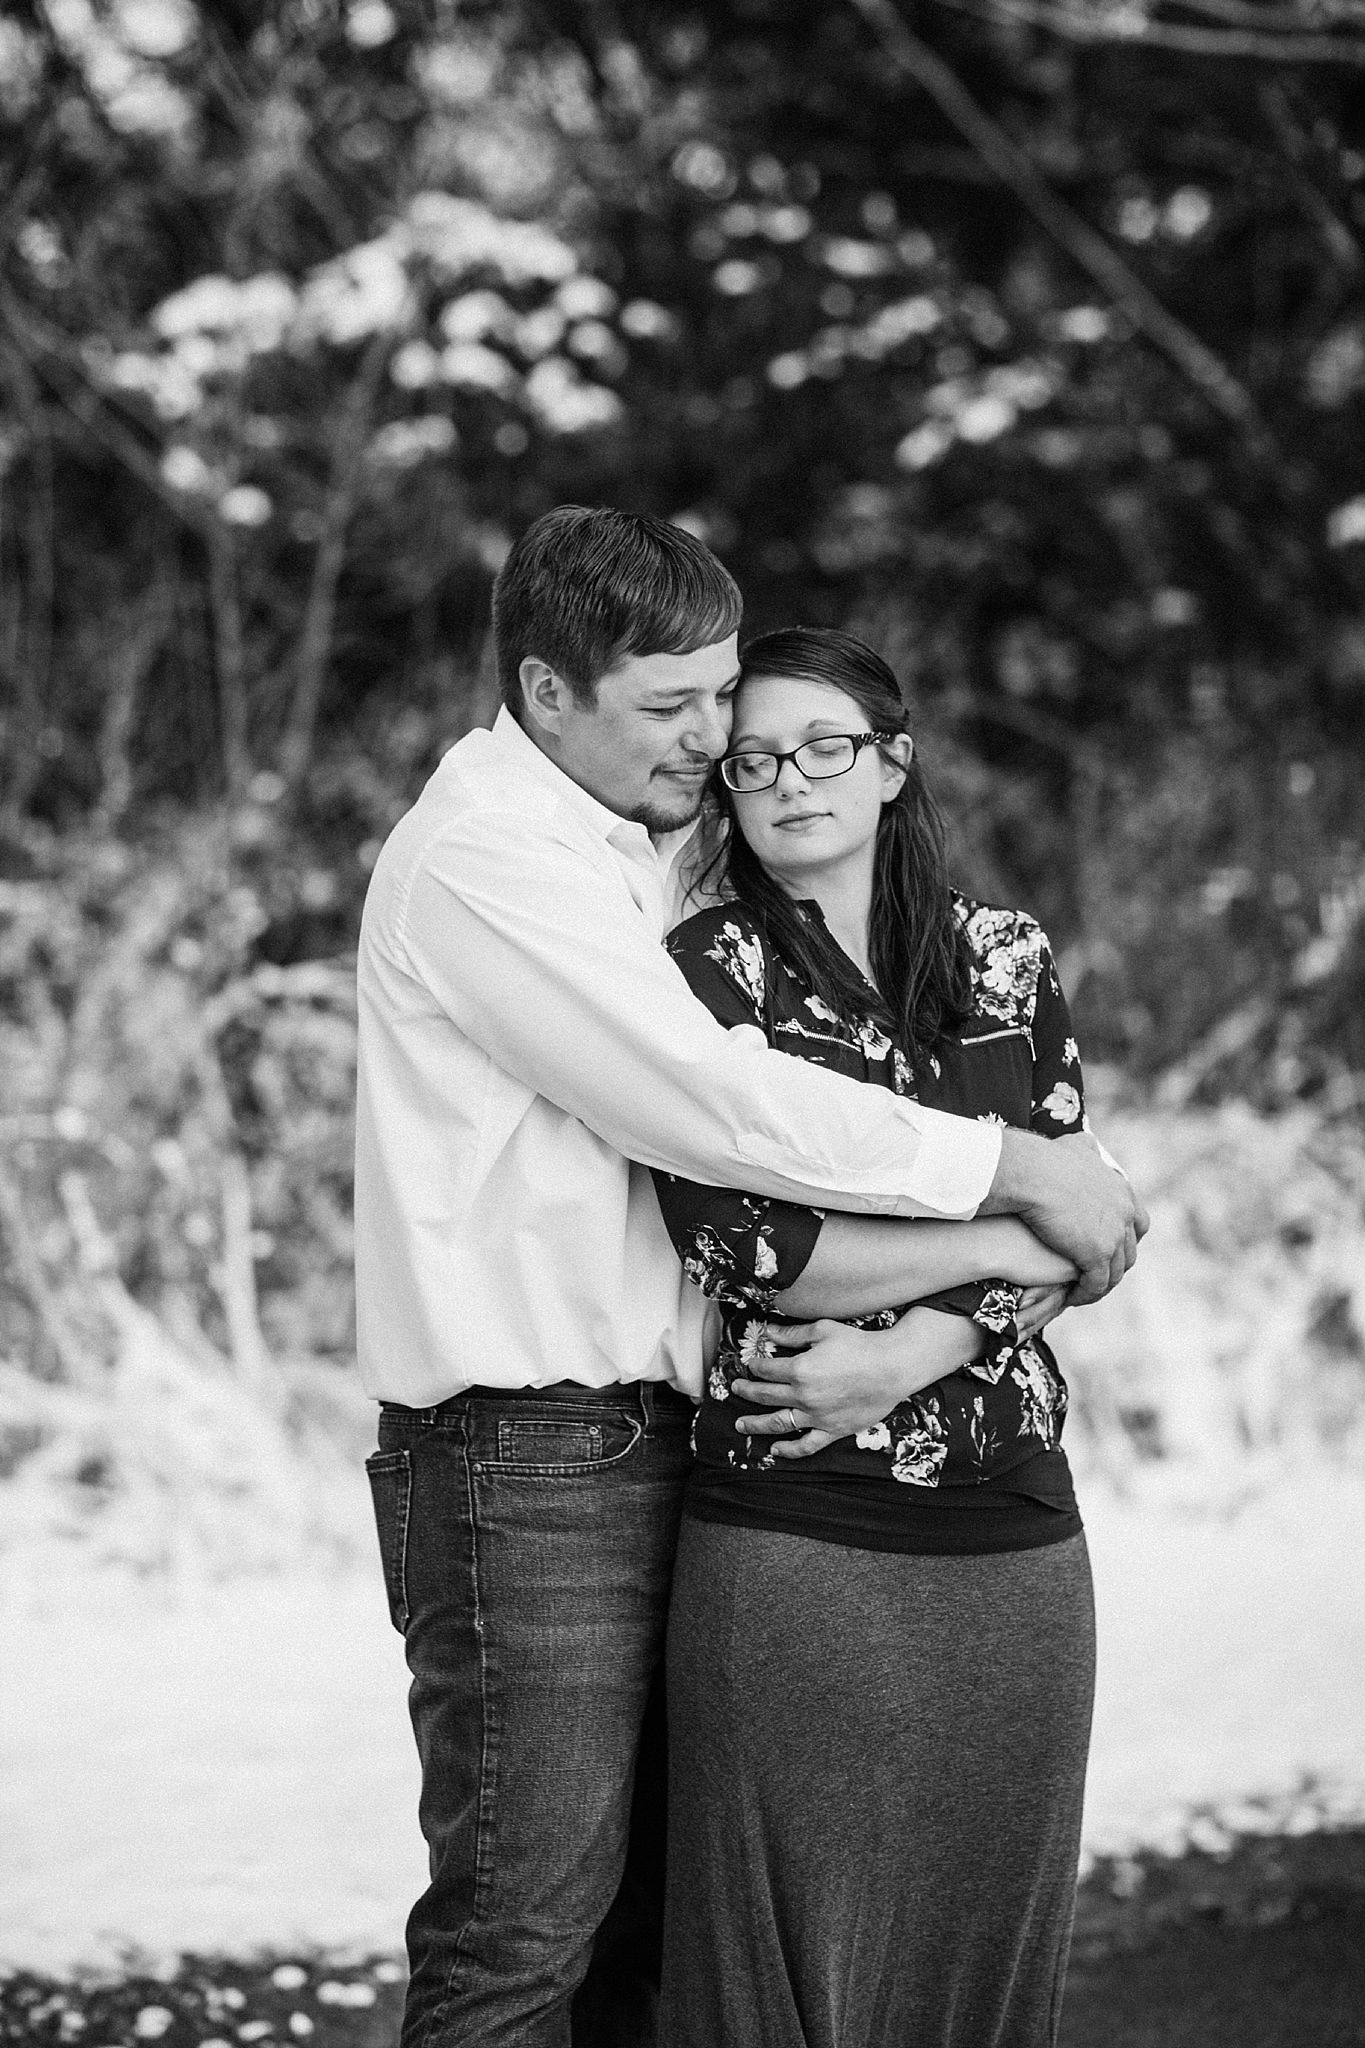 Bill and Monica Snowy Engagement Session at Wooster Memorial Park in Wooster Ohio | Wedding and Engagement Photographer in Wooster Ohio | Tiffany Reiff Photography and Design